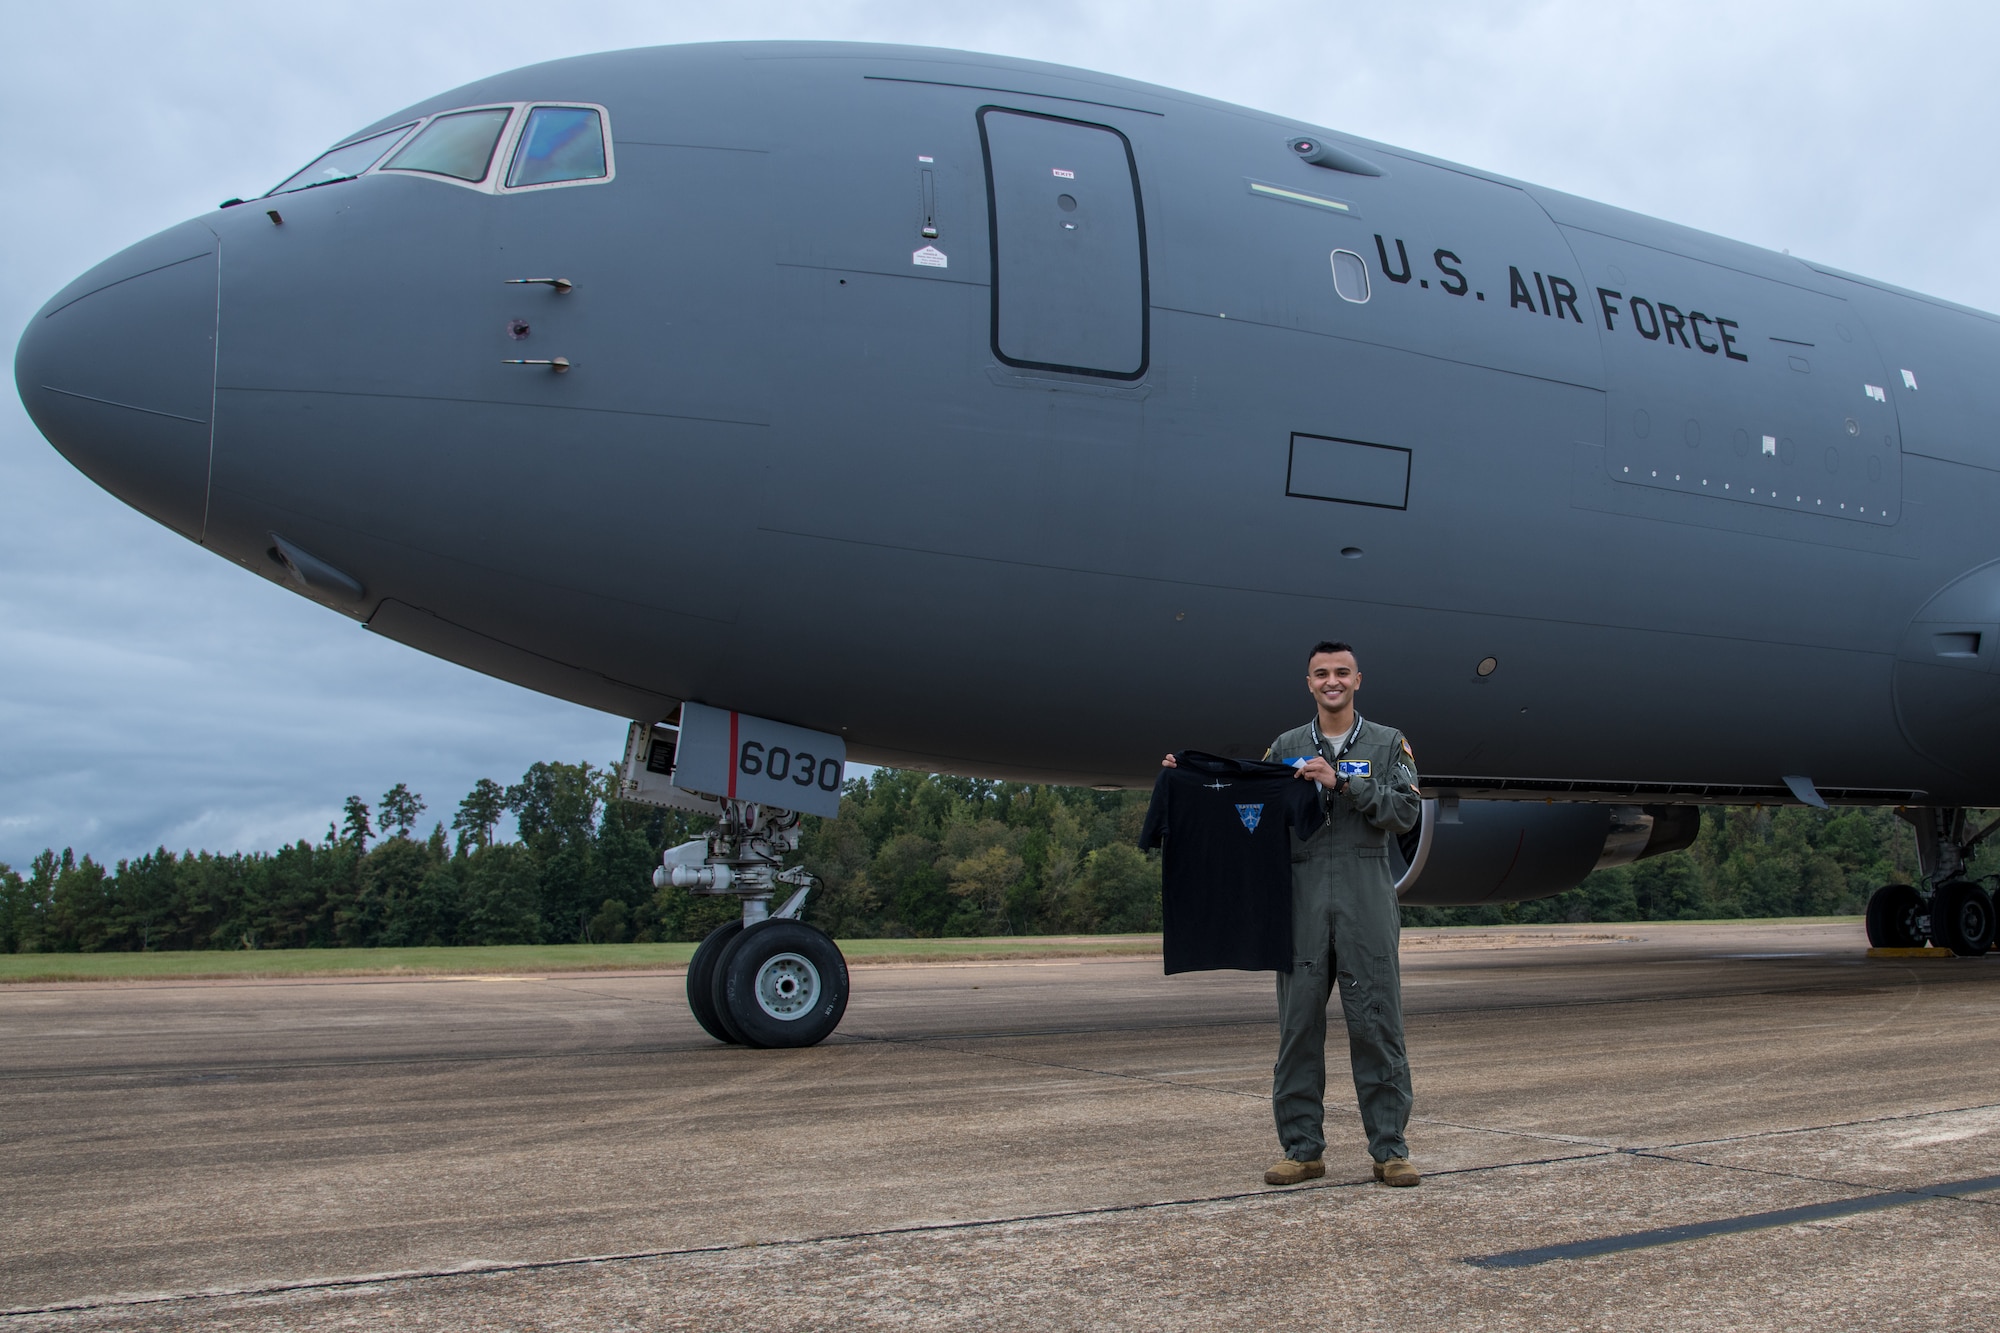 Second Lt. Alisson Moraes, 14th Student Squadron undergraduate pilot training graduate, poses with a 344th Air Refueling Squadron t-shirt in front of a KC-46A Pegasus Sept. 25, 2020 at Columbus Air Force Base, Mississippi. Moraes received the KC-46 as his future aircraft assignment, which became his number one choice after touring the aircraft for the first time in 2019. (U.S. Air Force photo by Senior Airman Skyler Combs)